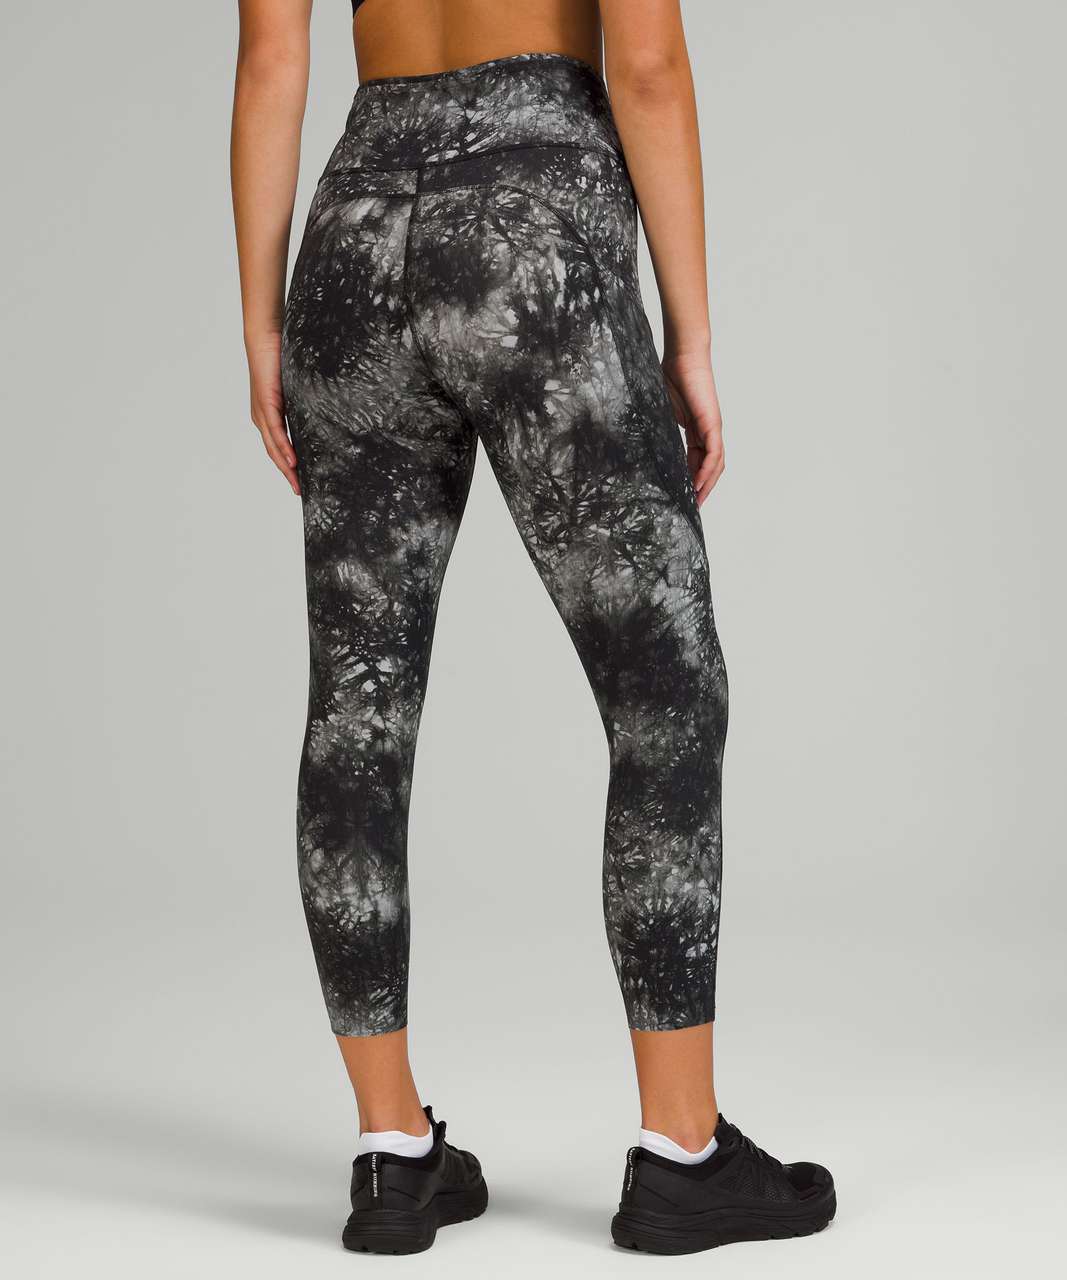 Lululemon Black/Gray Fast And Free Crop High Rise Leggings - Size